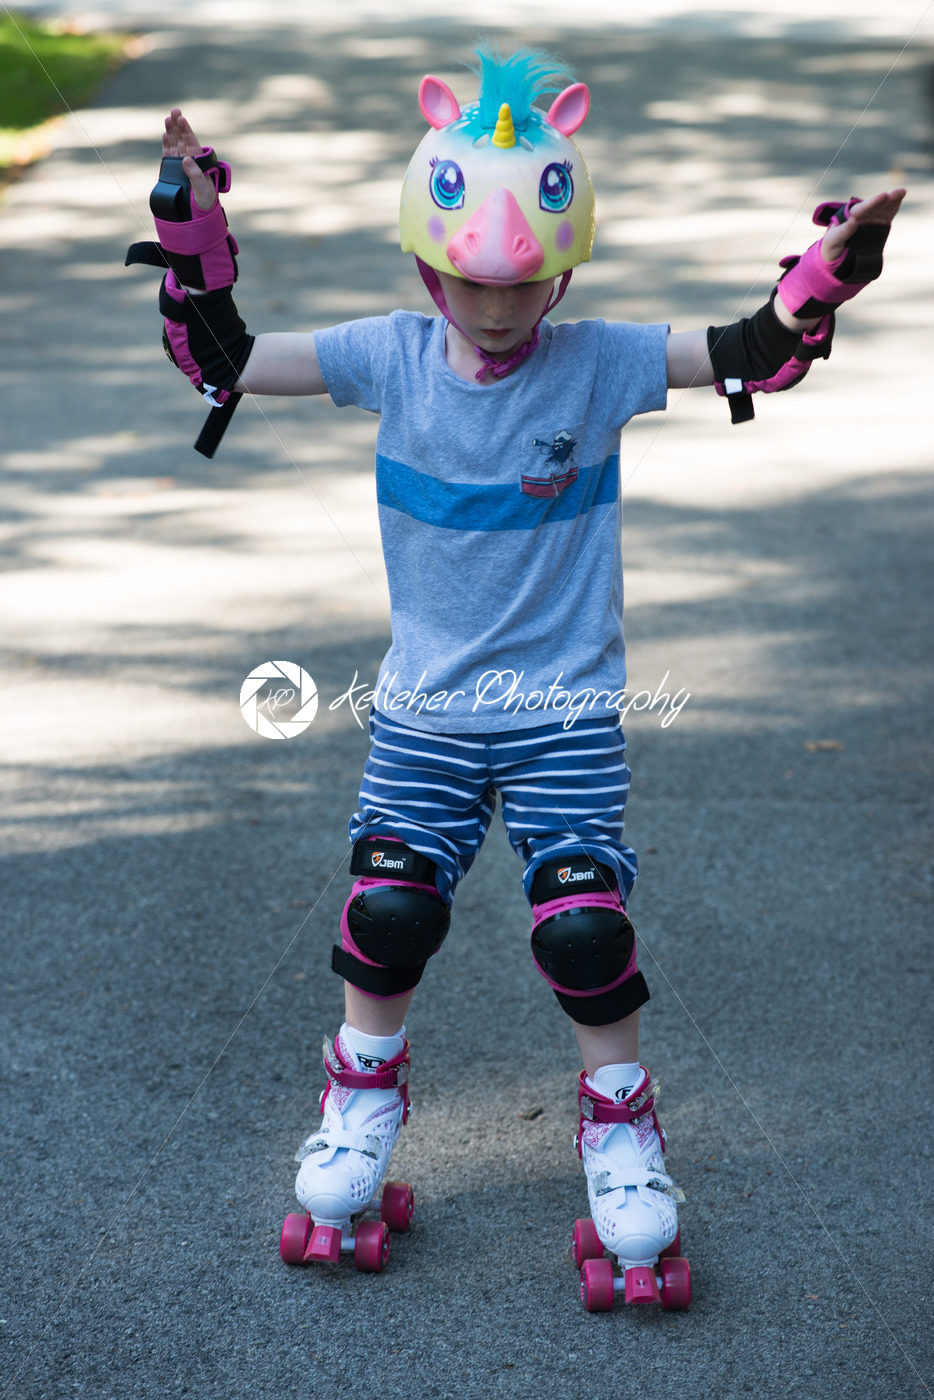 Young boy outside learning to riding on roller skates on driveway wearing protective helmet and elbow, wrist and knee pads - Kelleher Photography Store